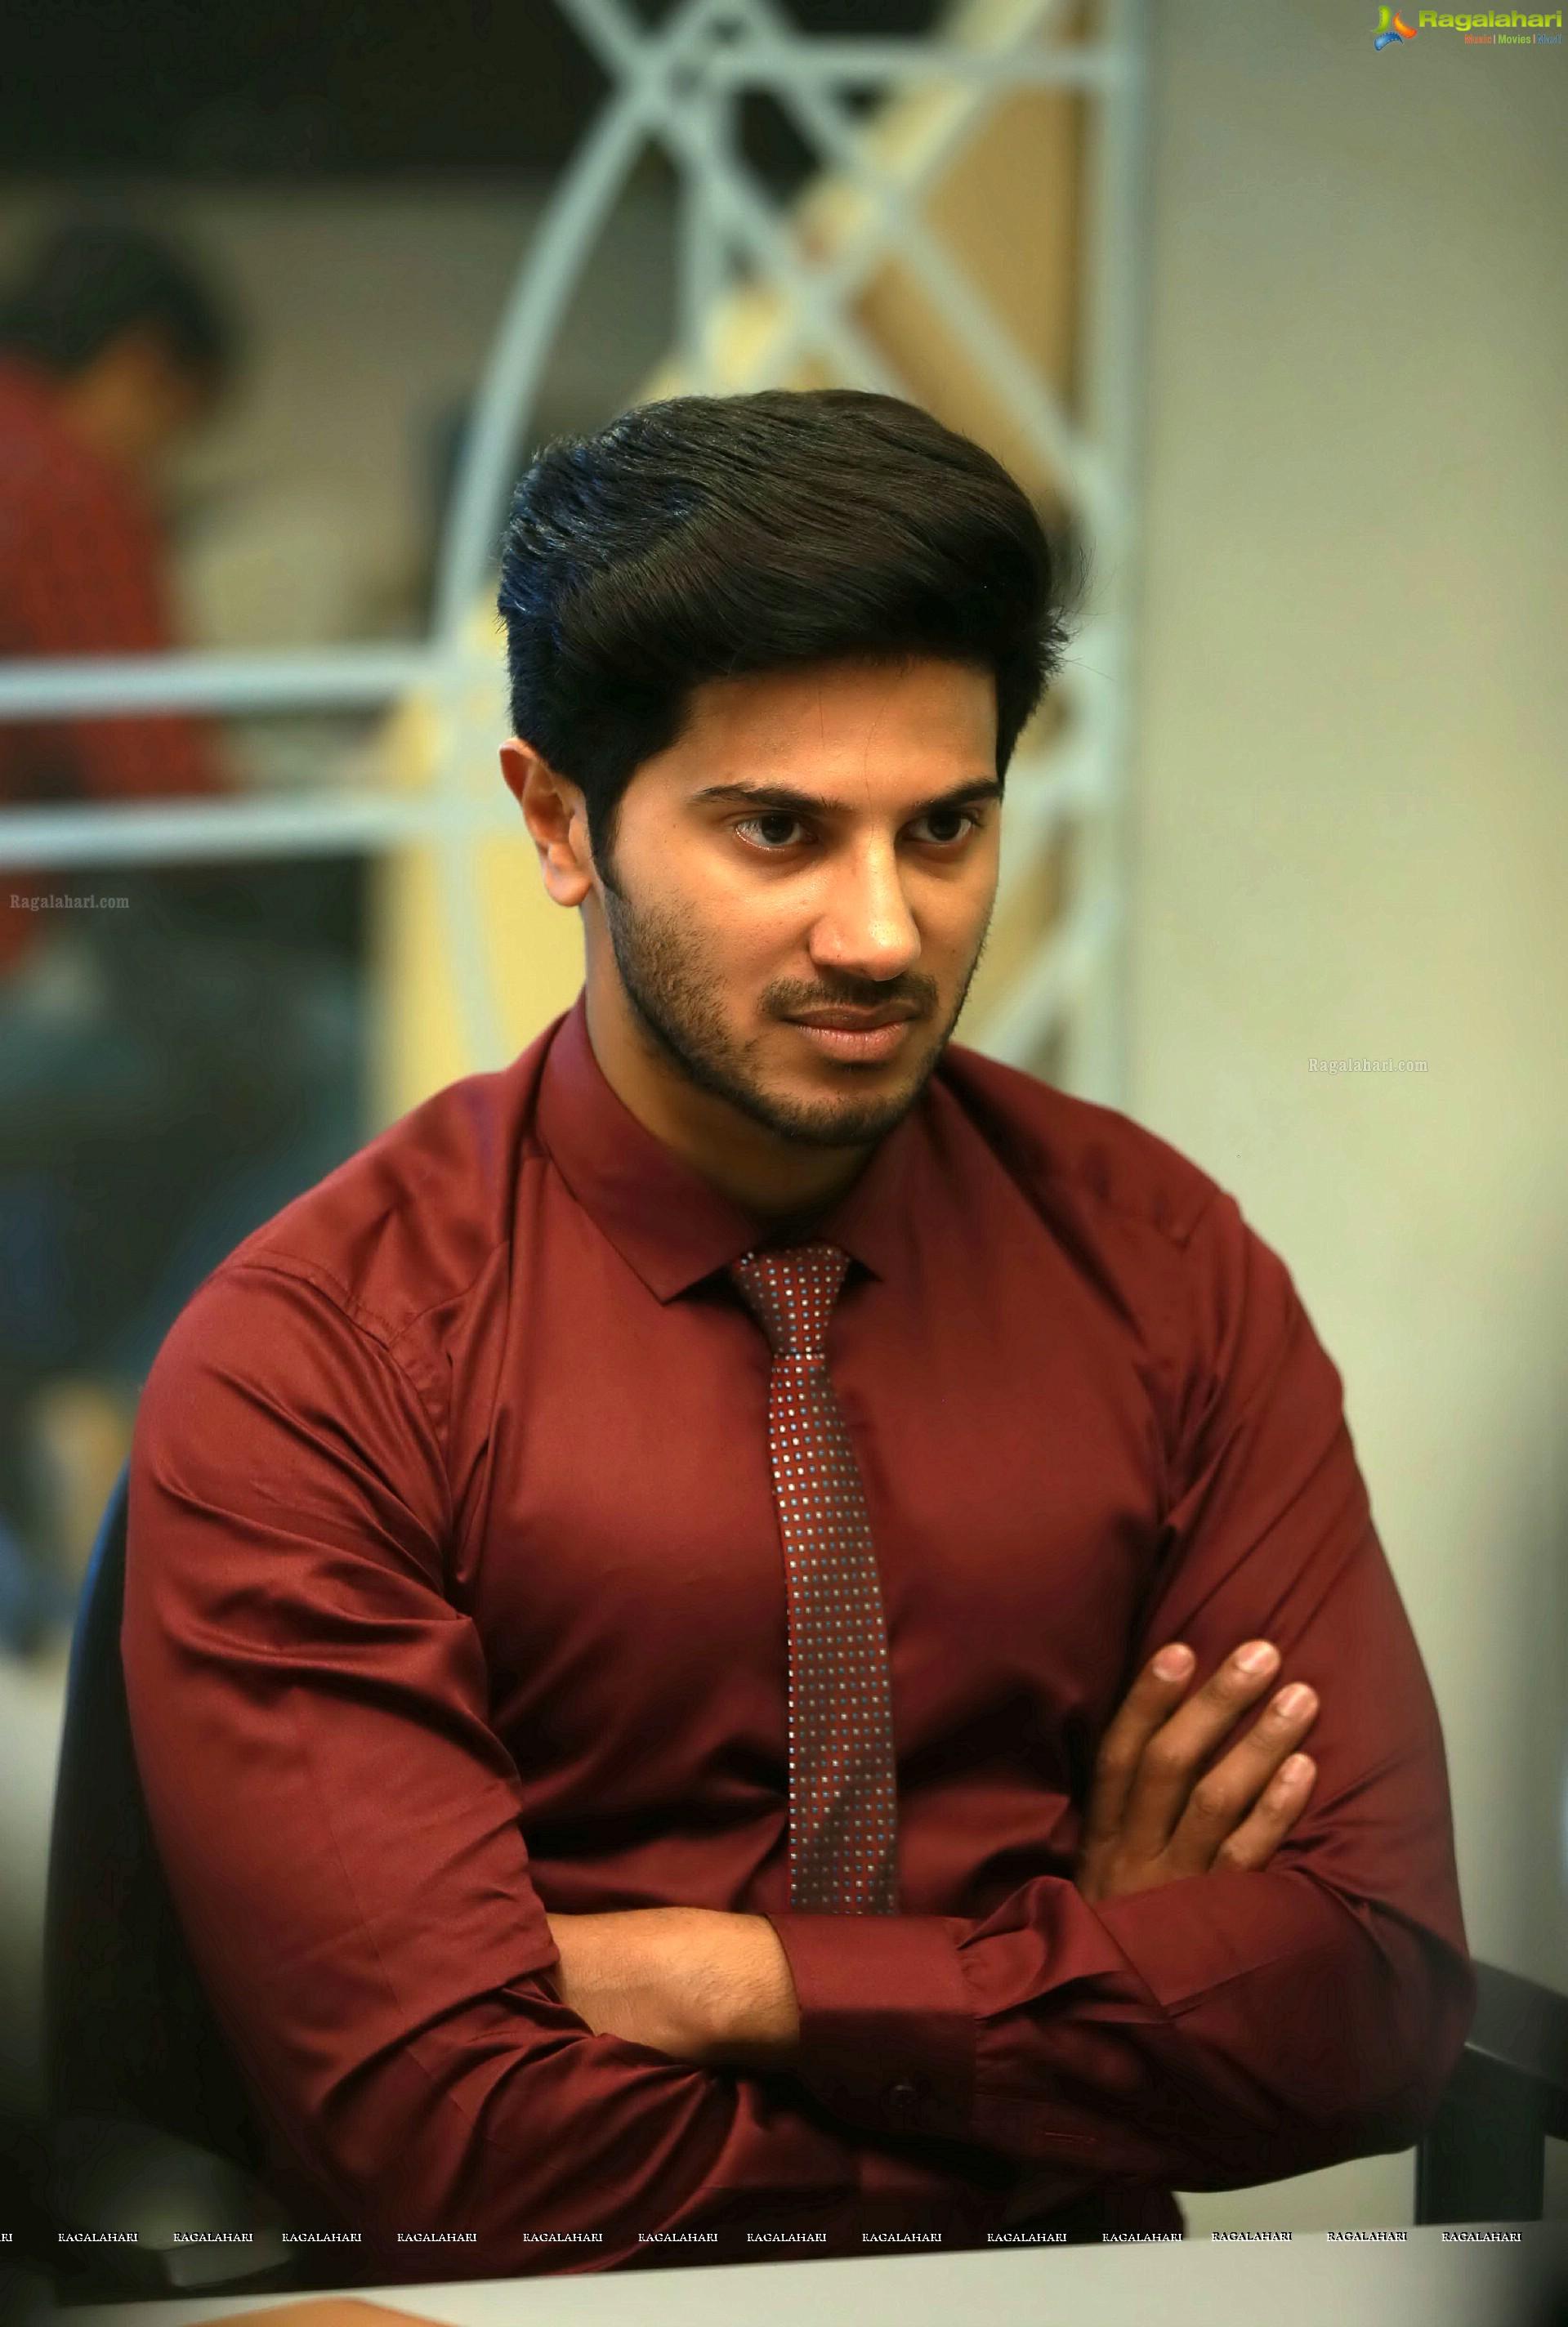 Dulquer Salmaan (HD) Image 5. Latest Actor Galleries, Image, Pics